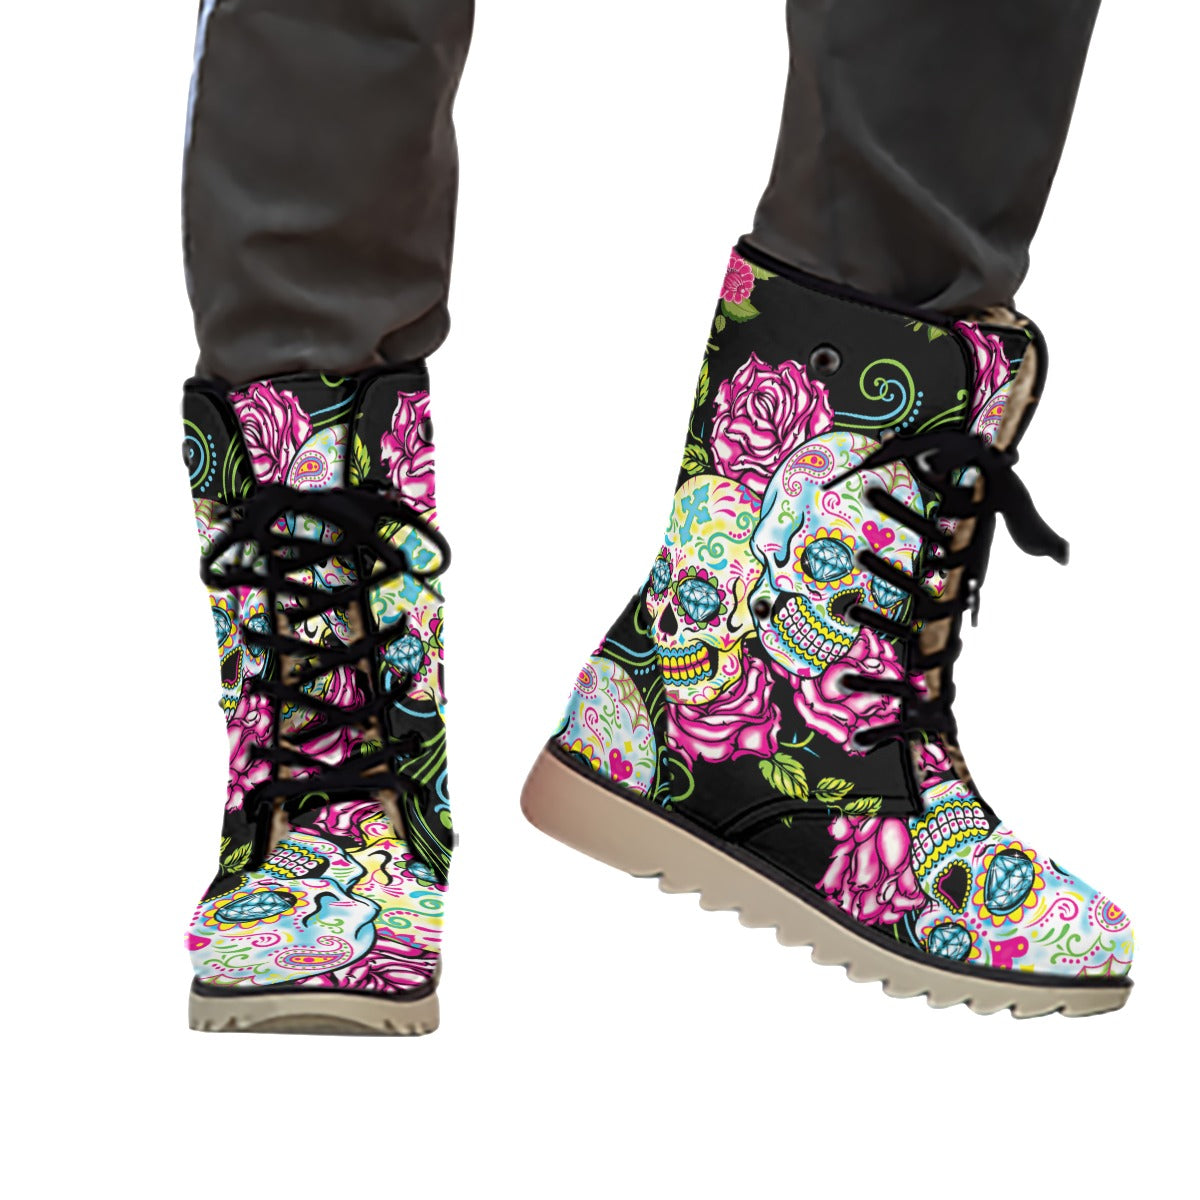 Sugar skull Day of the dead Women's Plush Boots, Floral skull boots